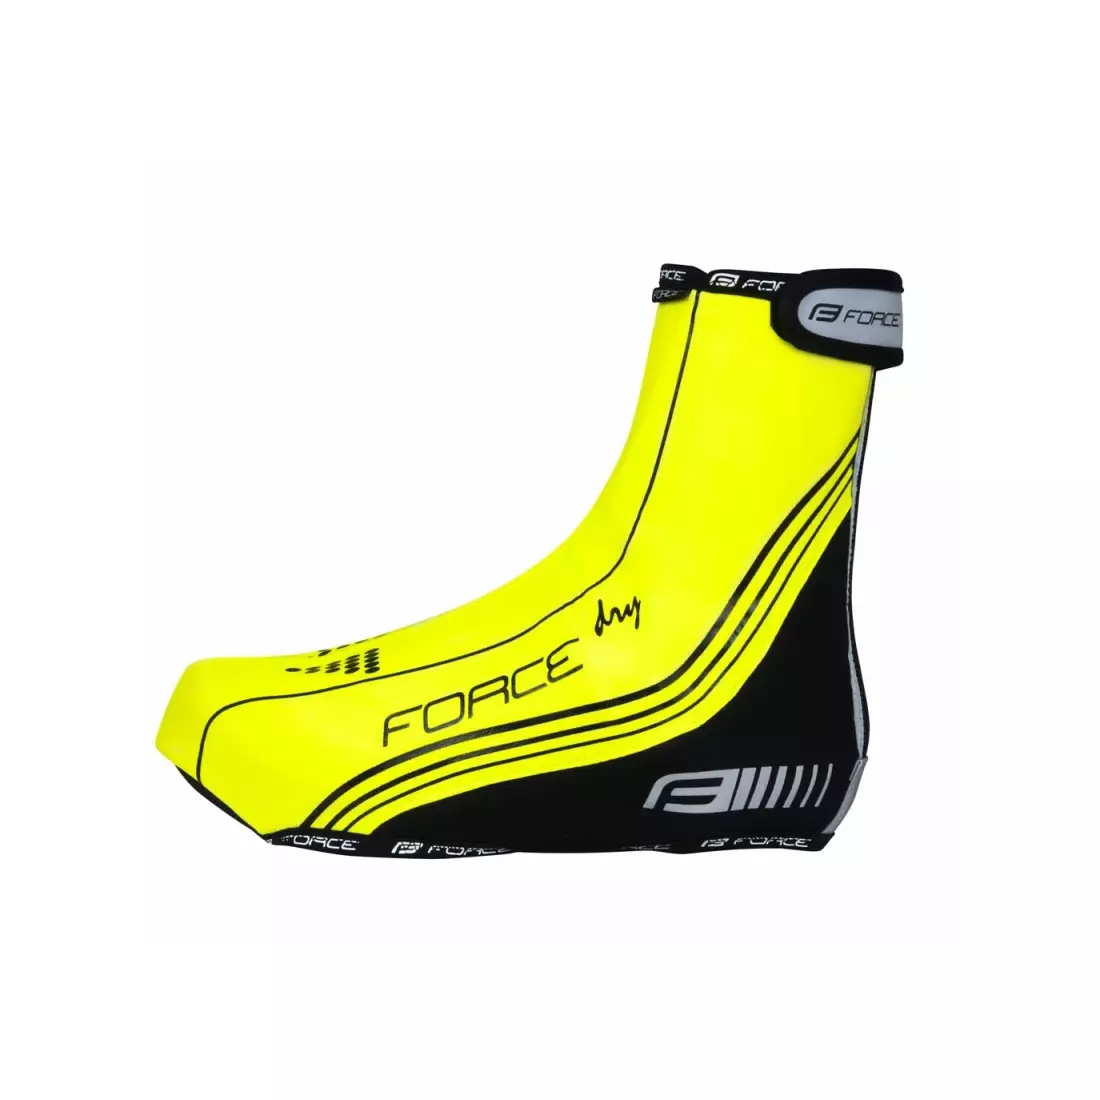 FORCE RAINY PU DRY rain covers for cycling shoes 90599